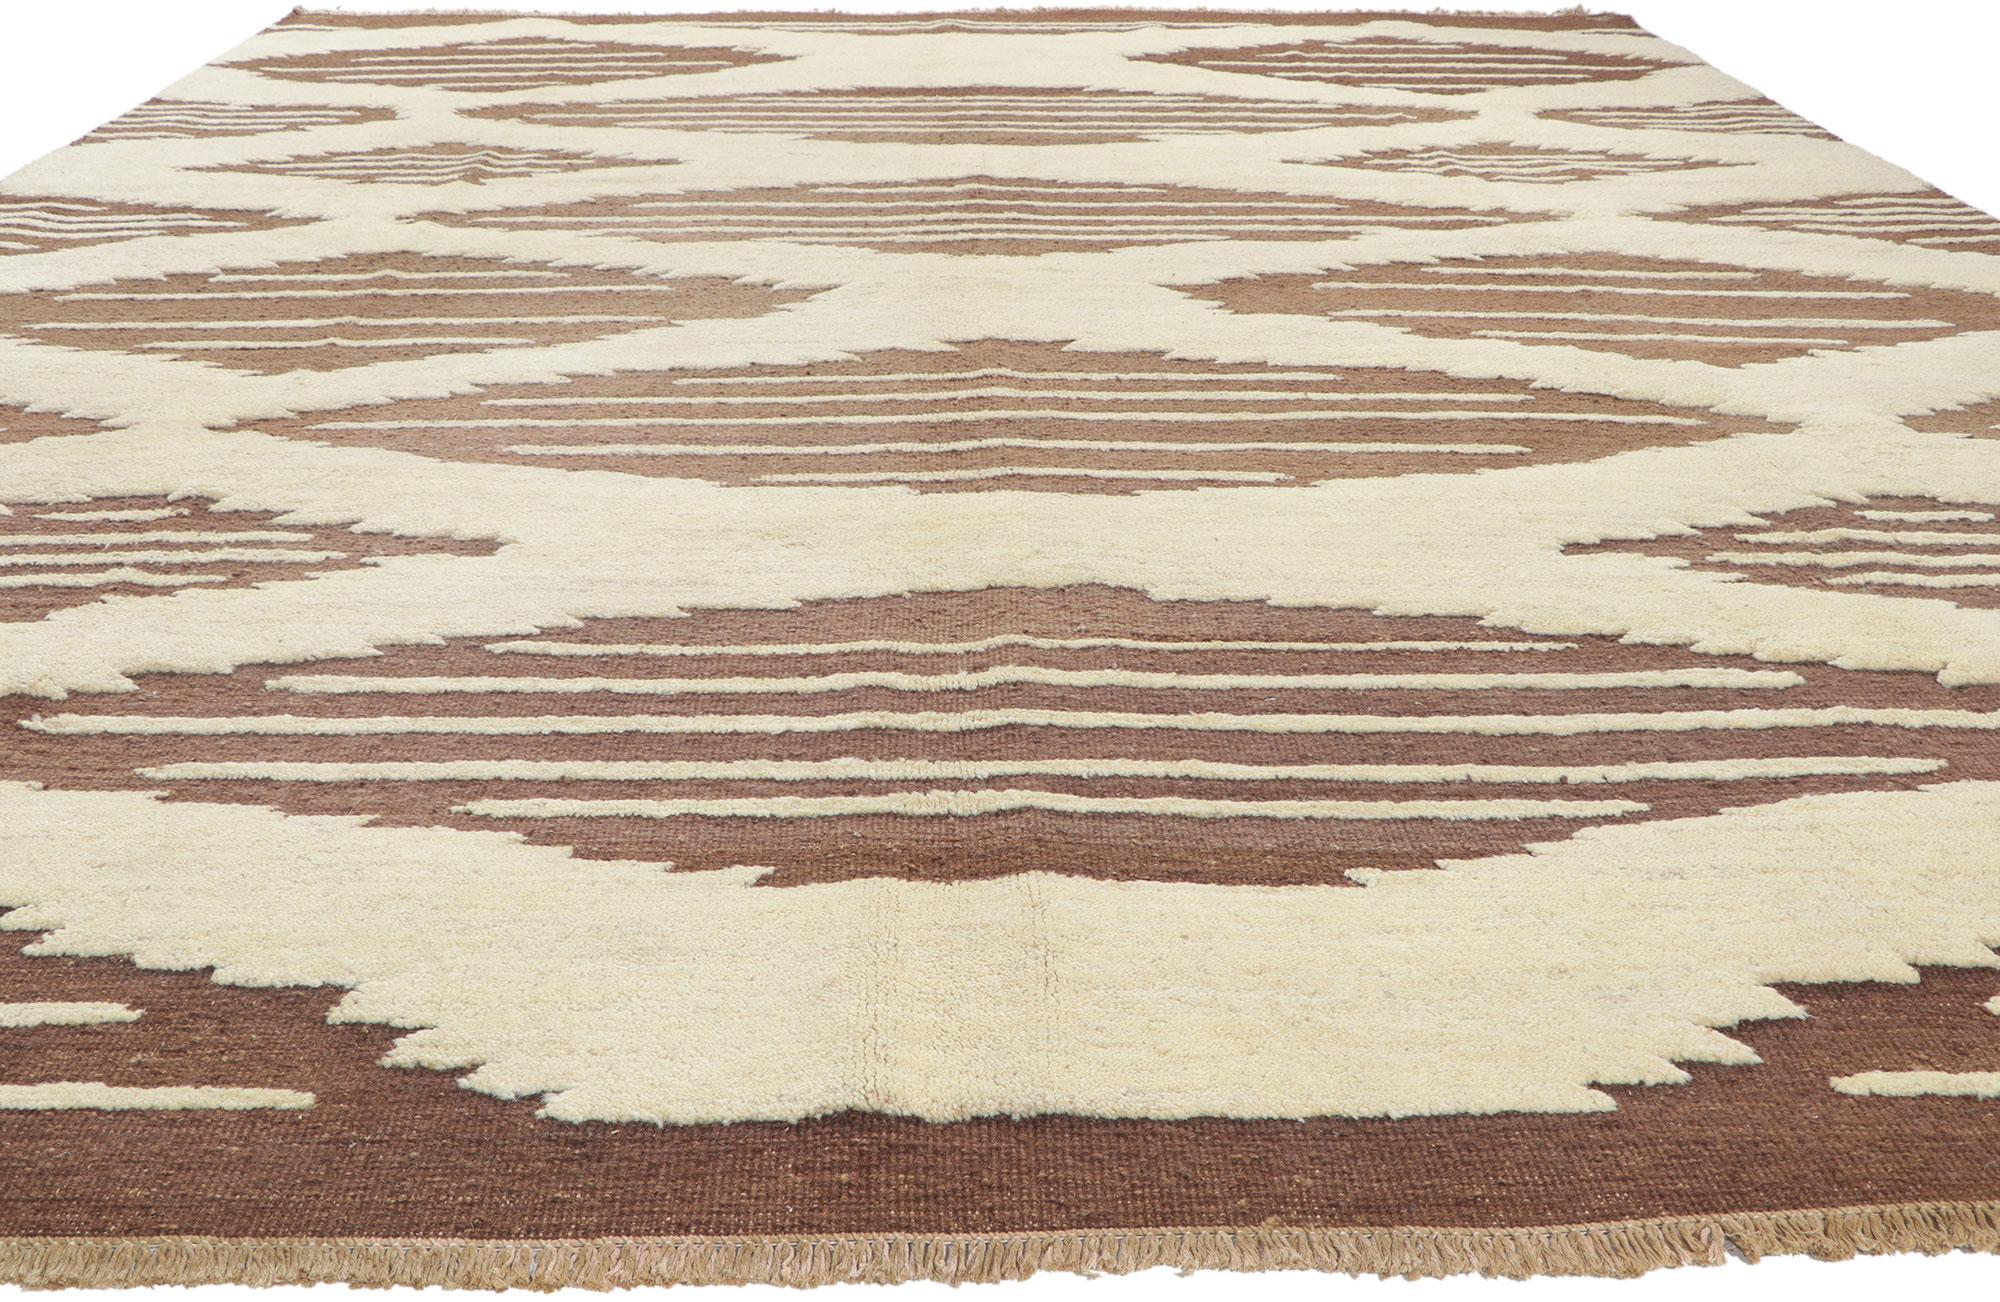 80373 New Moroccan High-Low Rug, 10'05 x 13'02.
Emanating nomadic charm with incredible detail and texture, this Moroccan high-low rug is a captivating vision of woven beauty. The raised beige Navajo design and earthy colorway woven into this piece